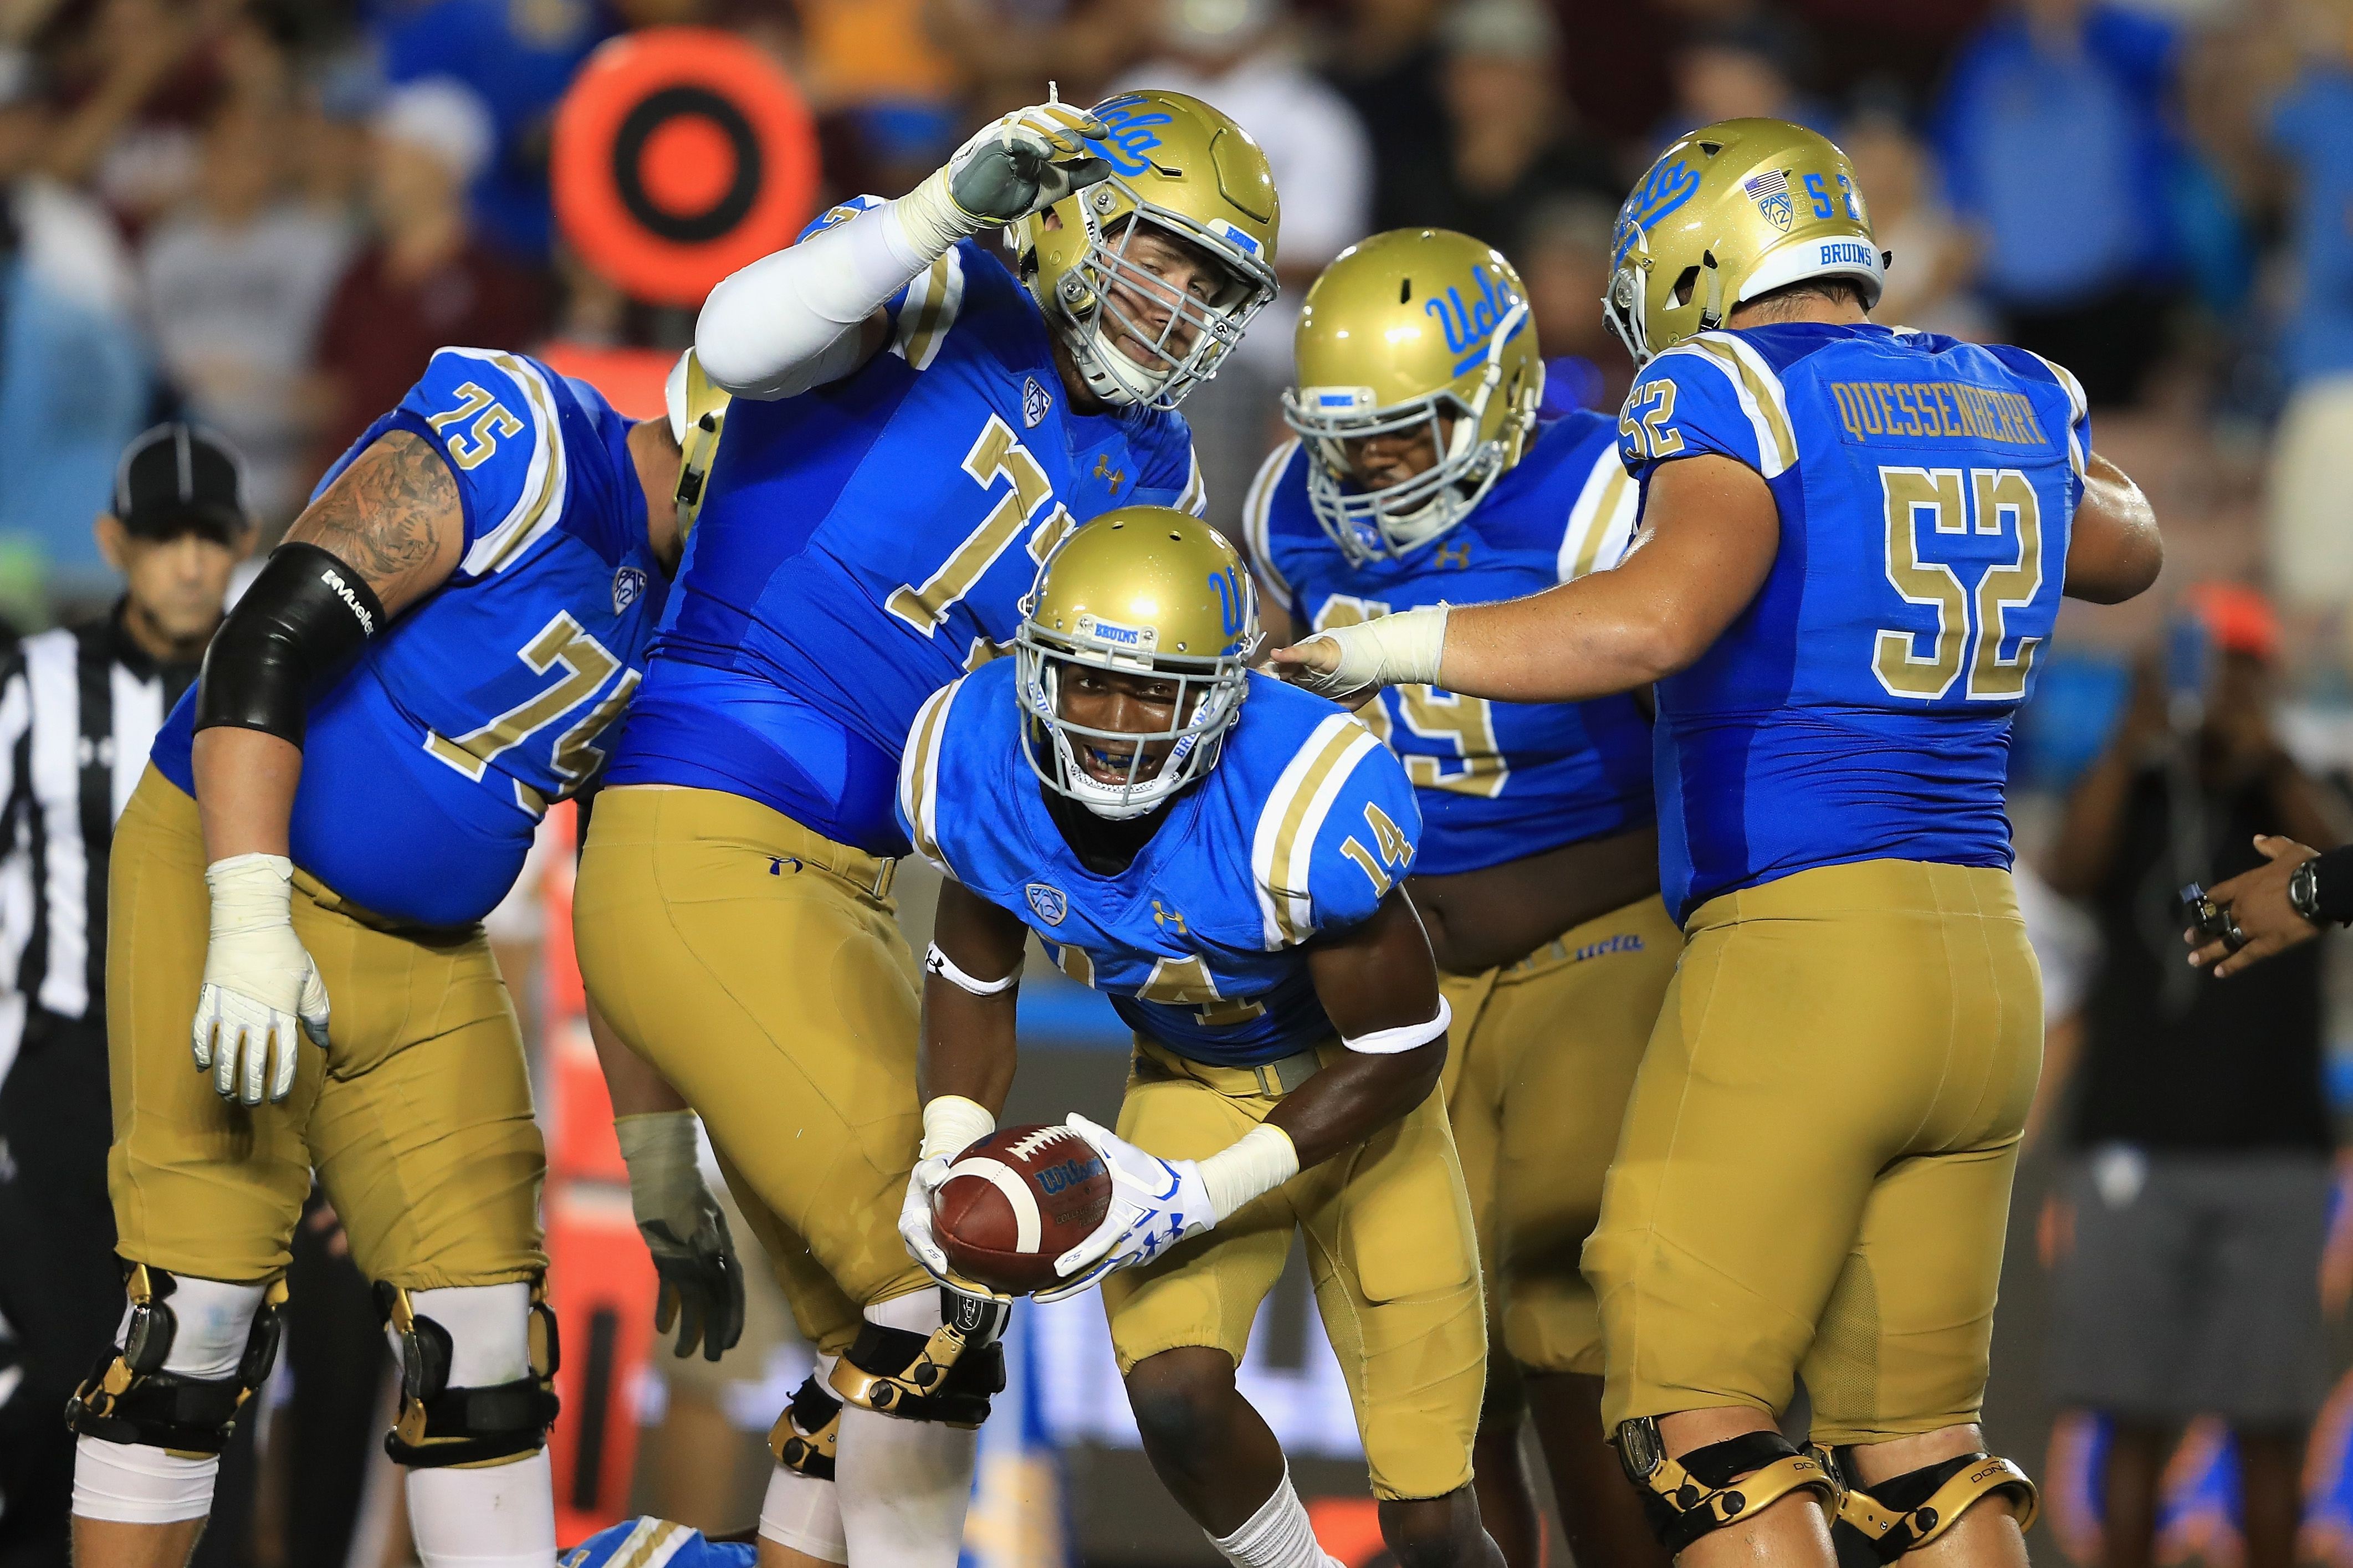 UCLA Football OT Kolton Miller picked 15 overall by Oakland in the NFL